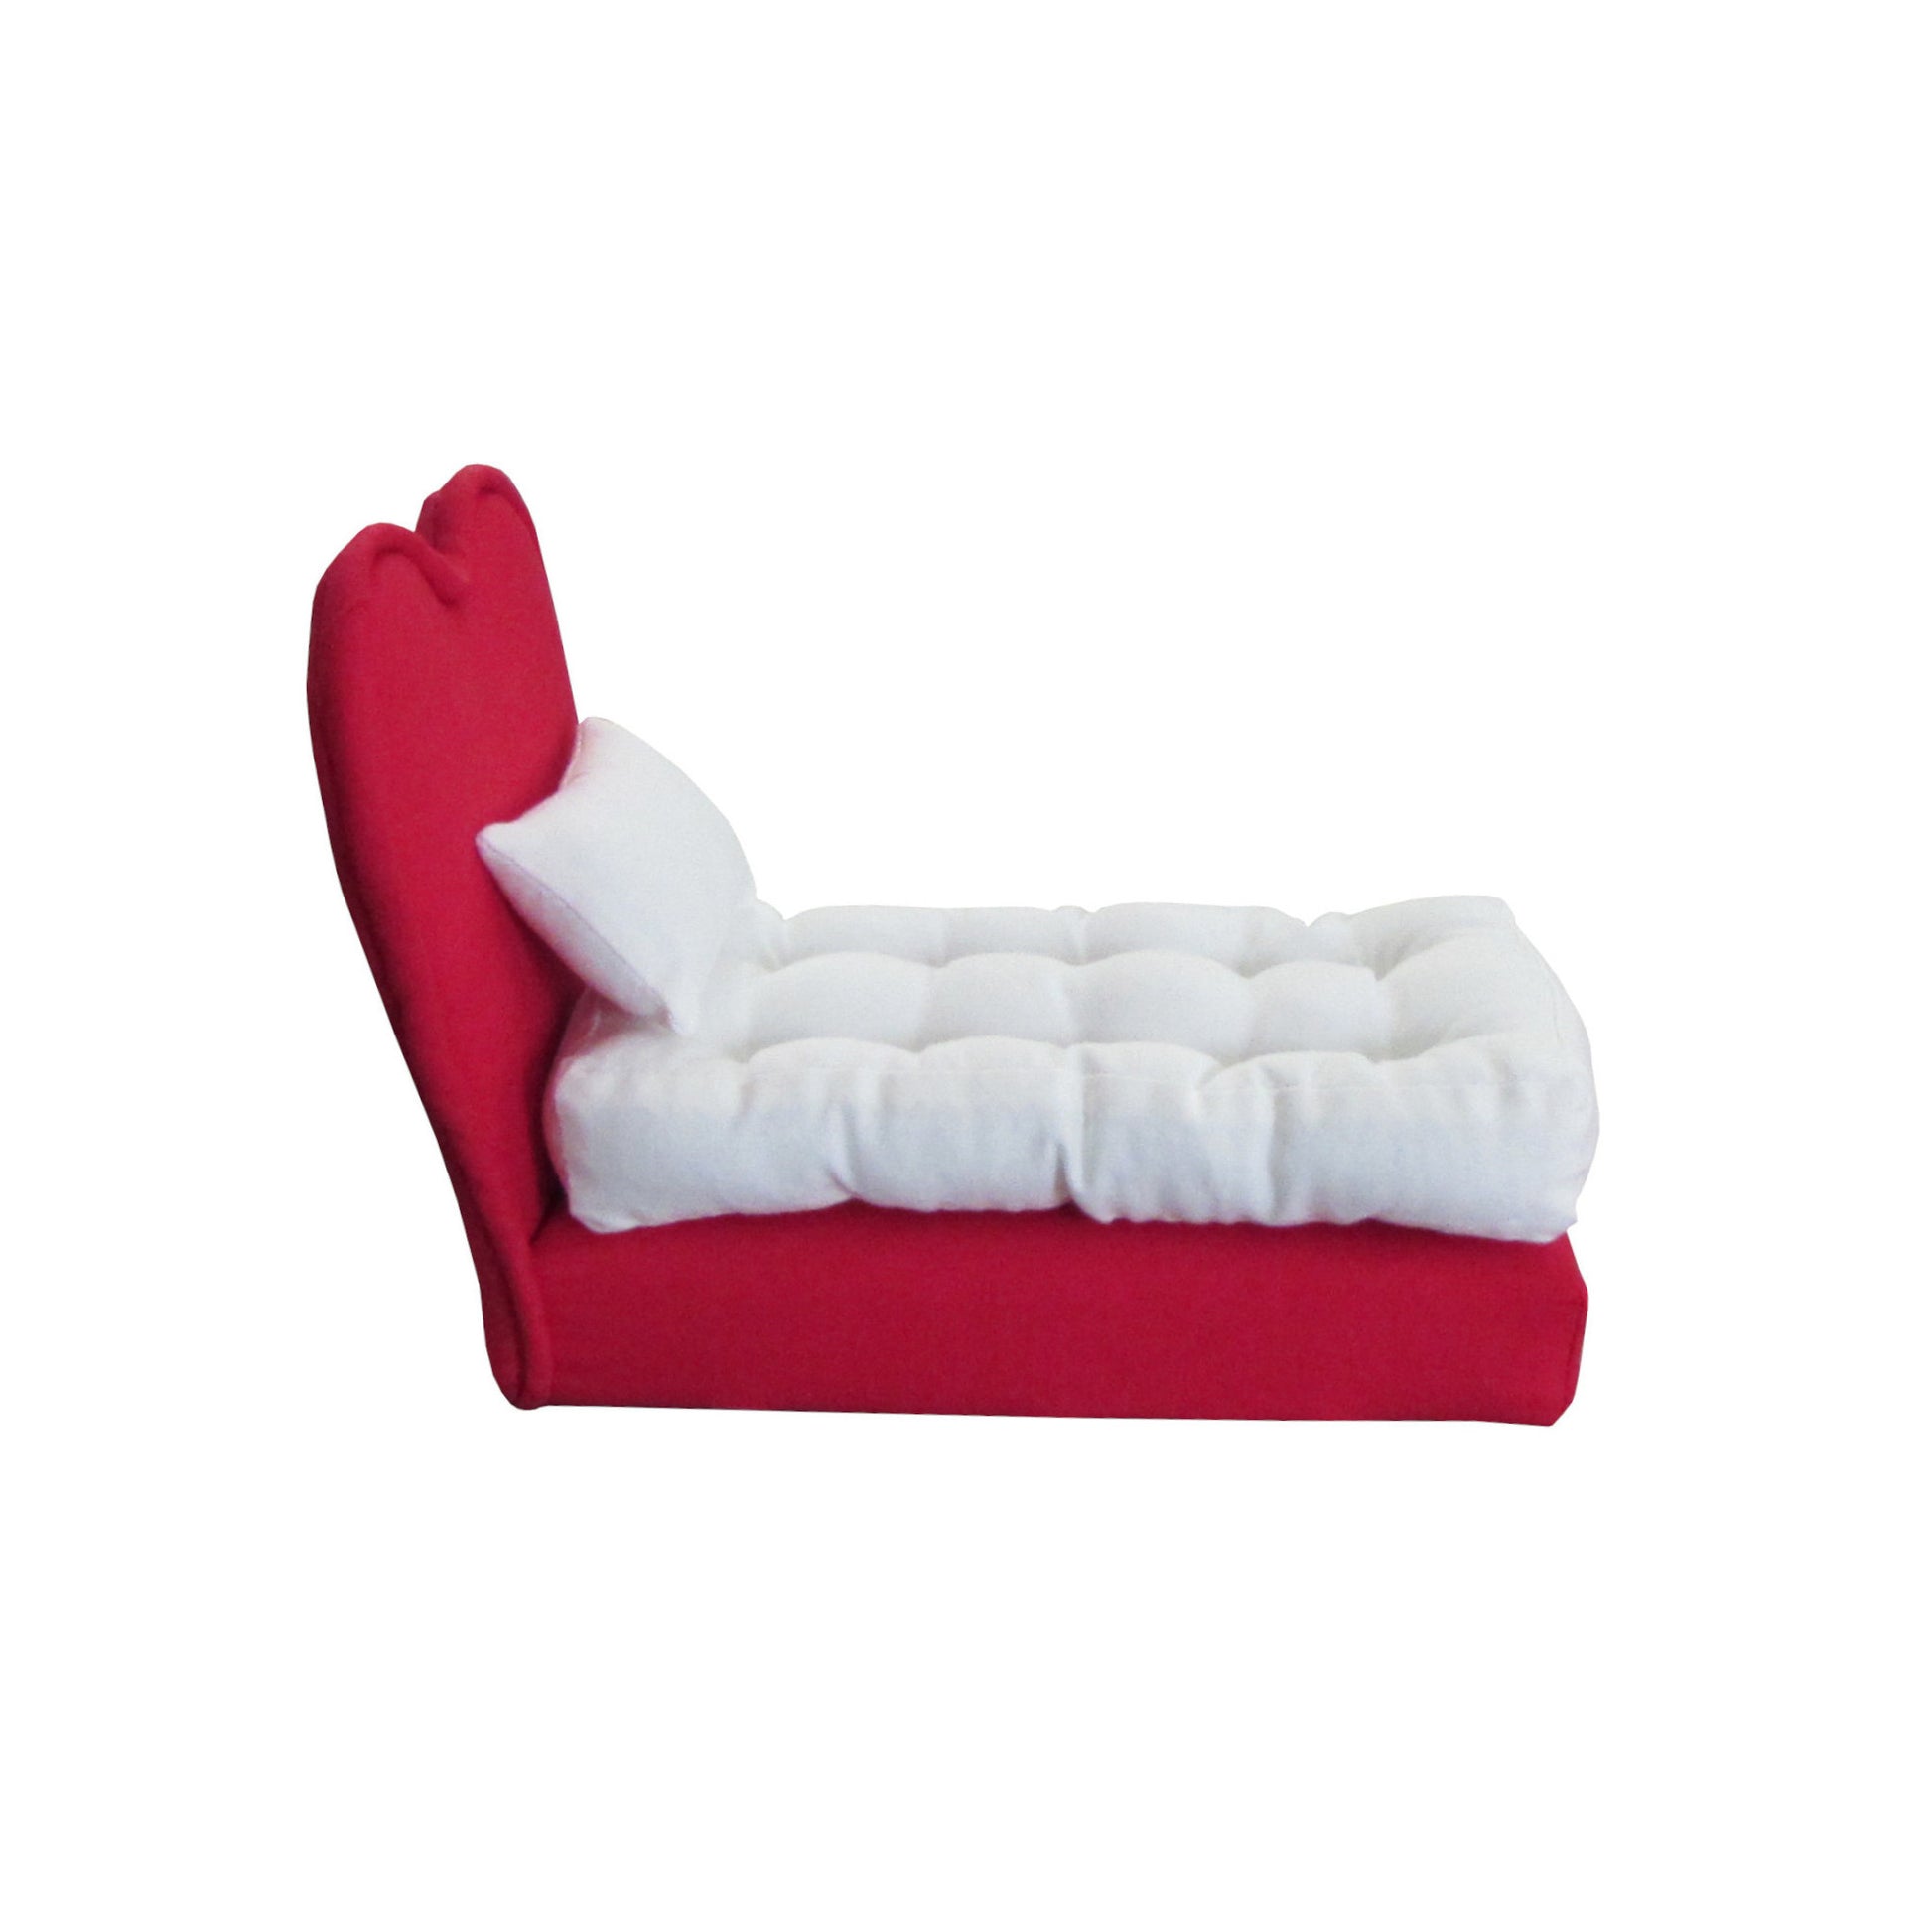 Upholstered Red Heart Doll Bed for 6.5-inch dolls